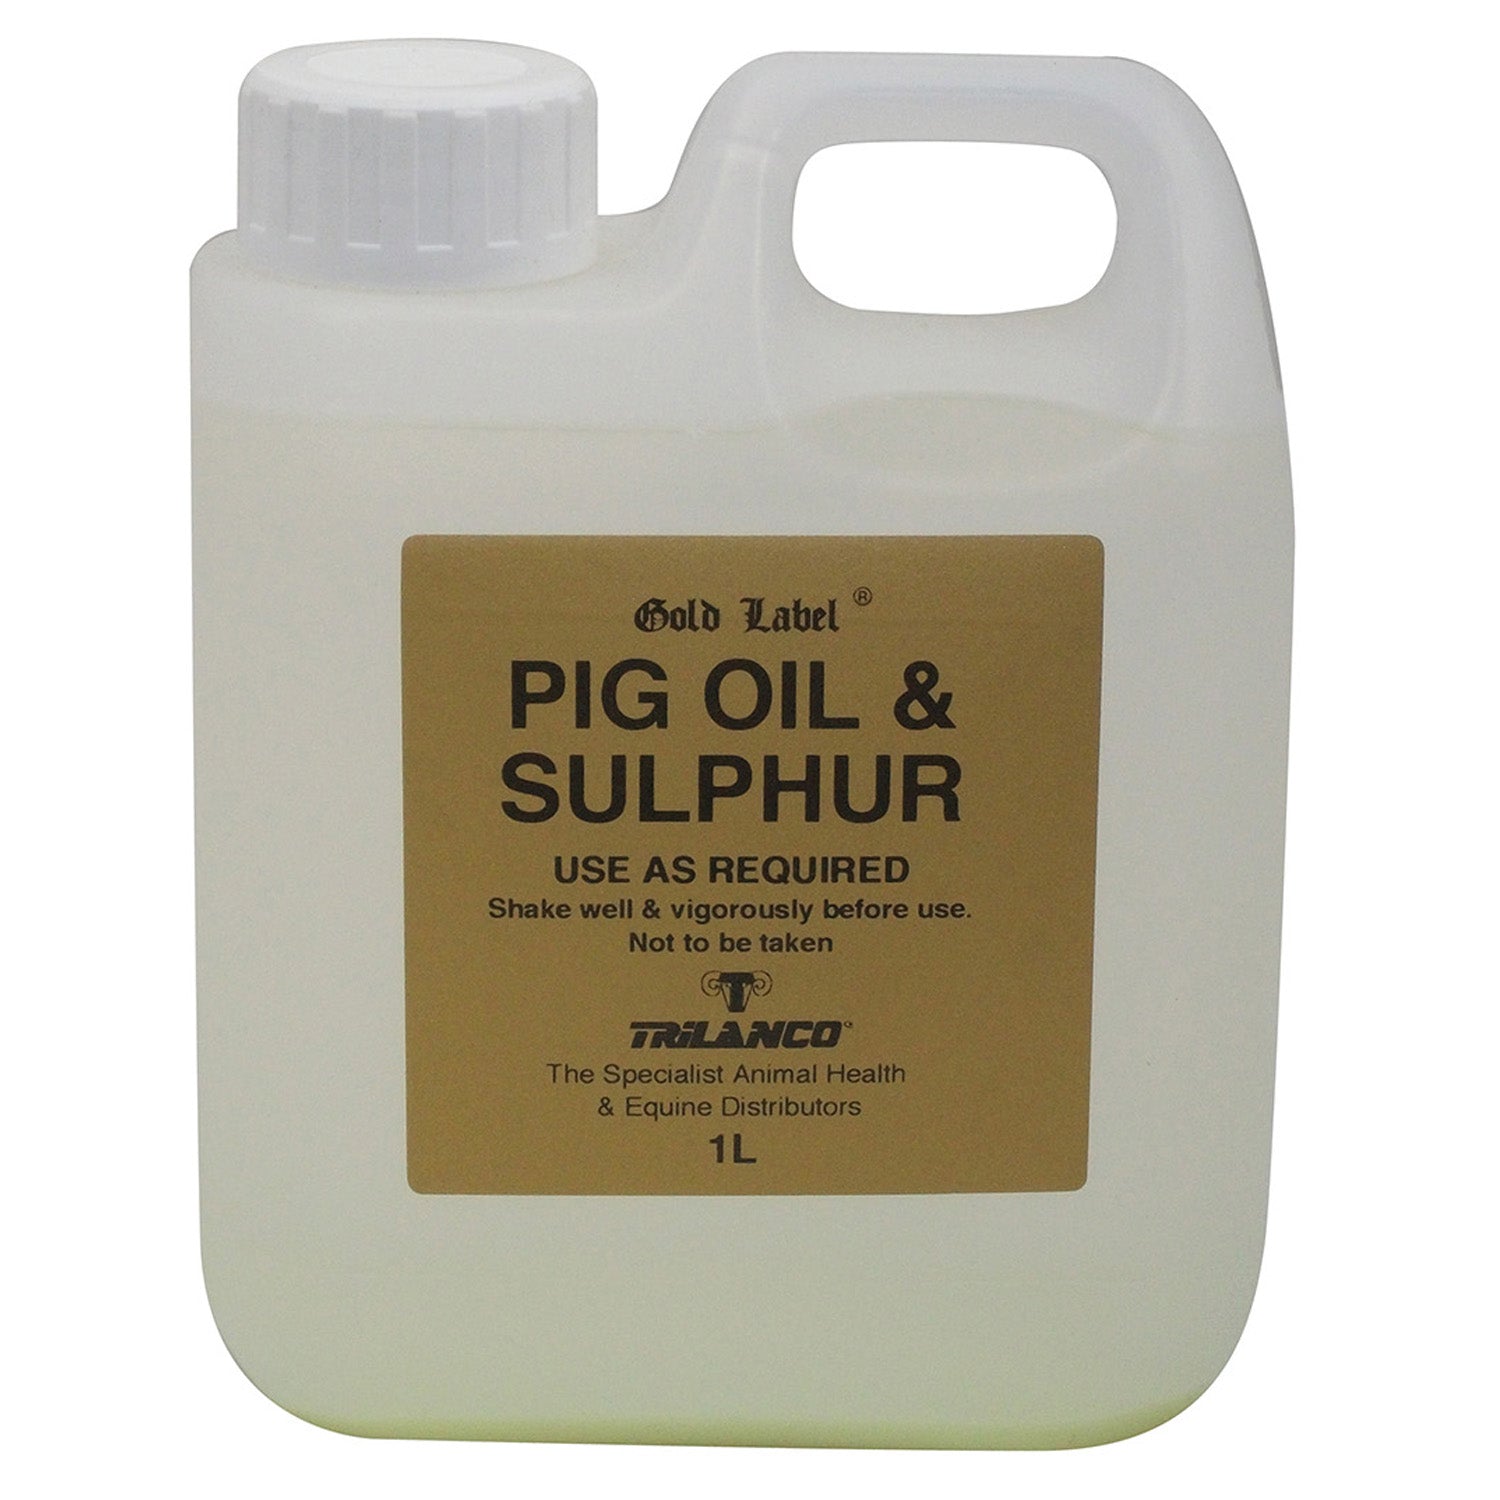 Gold Label Pig Oil And Sulphur For Horses- Various Sizes